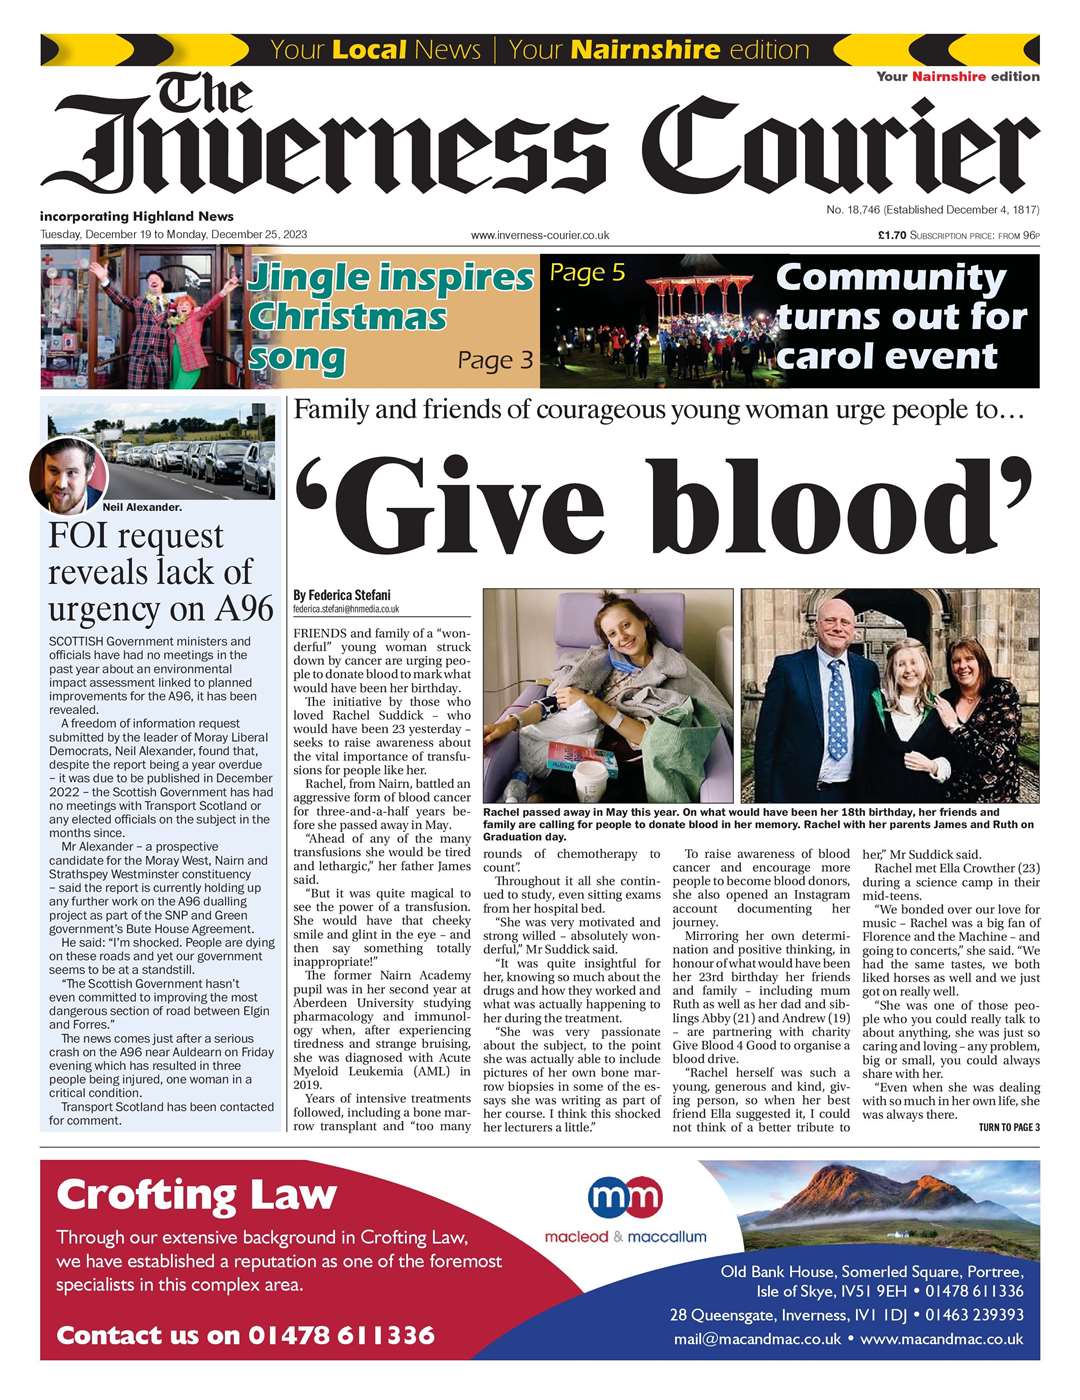 The Inverness Courier (Nairnshire edition), December 19, front page.